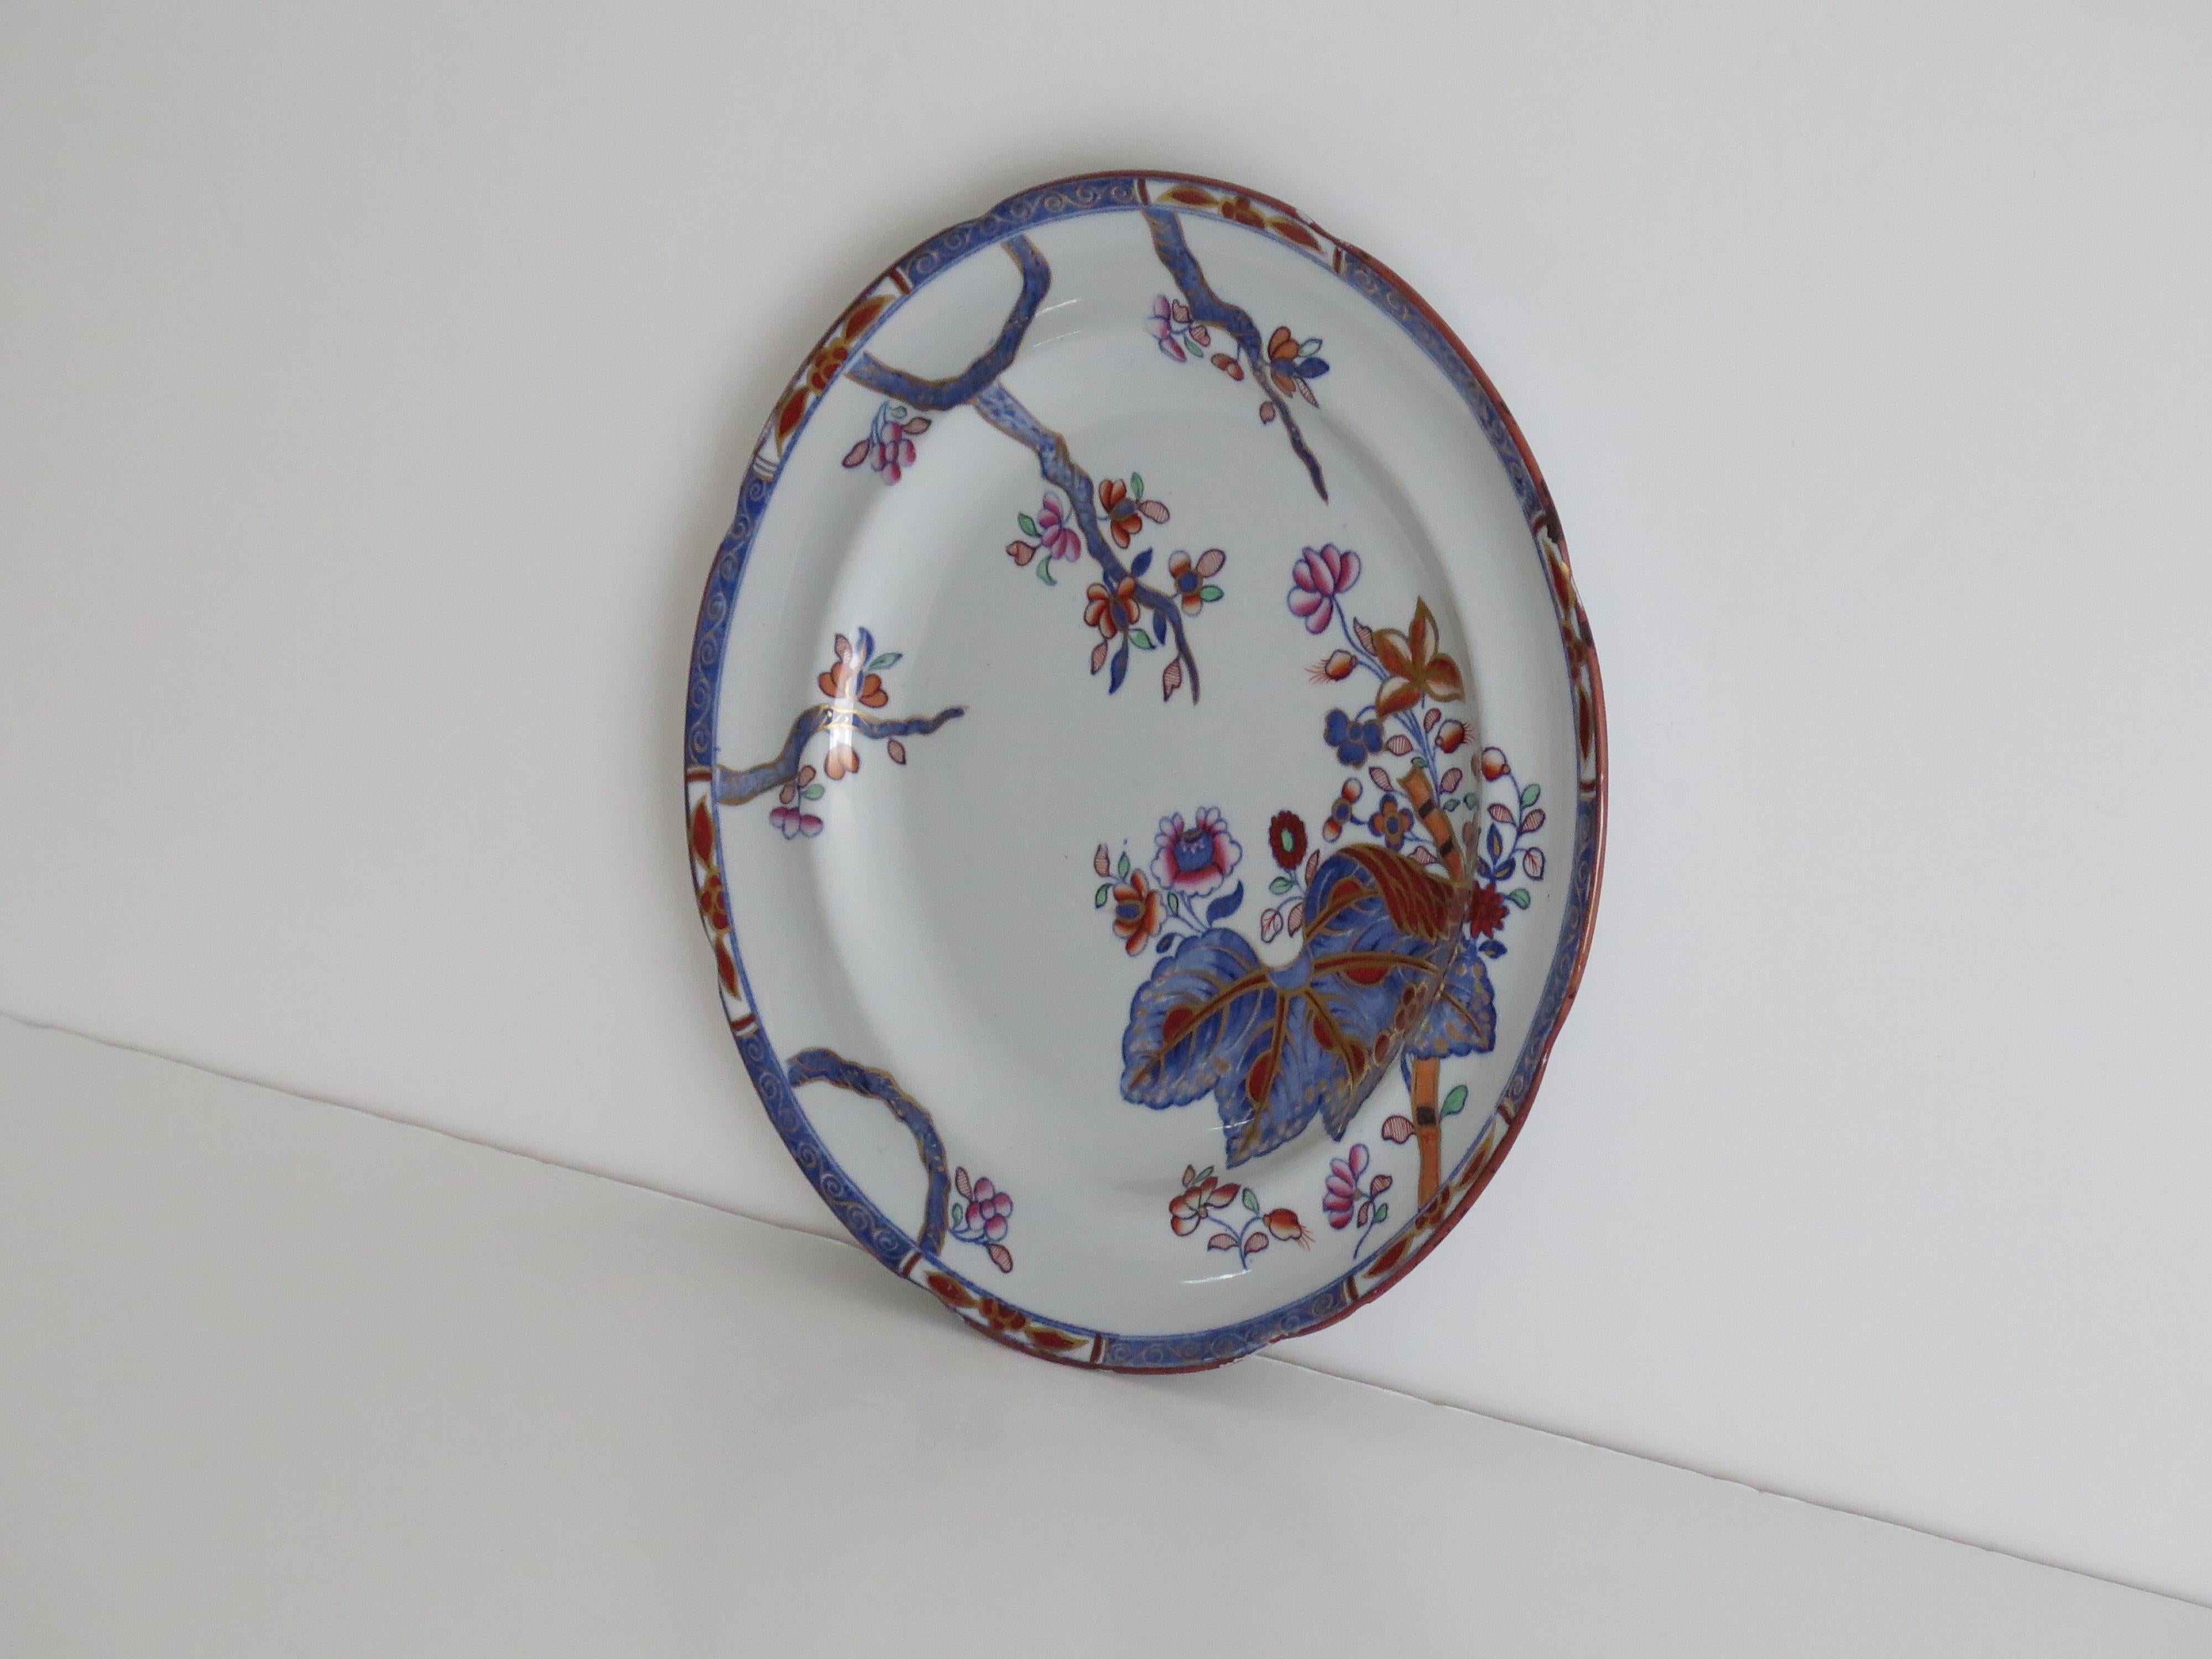 Chinoiserie Copeland Spode Stone China Dinner Plate Tobacco Leaf Pattern No. 2061, Ca 1880